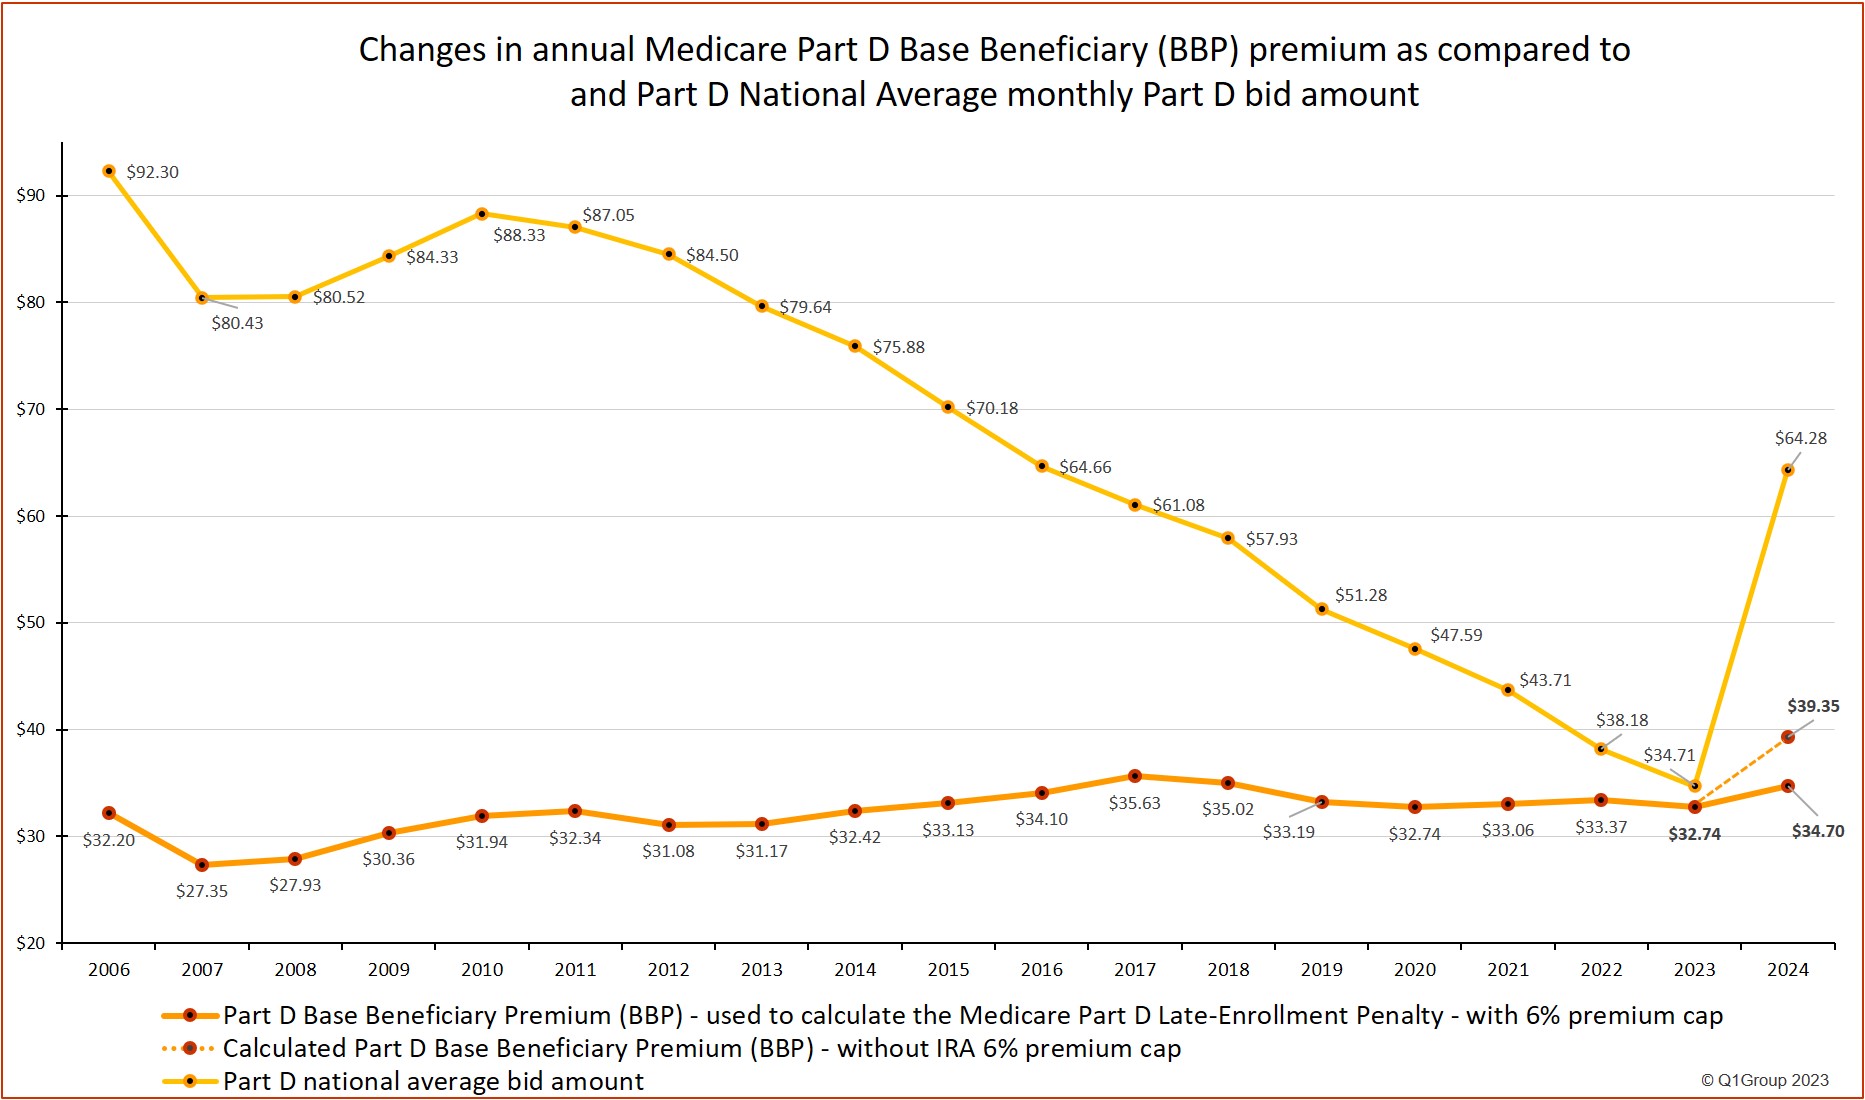 Changes to Medicare Part D national average Part D plan bids to BBP - since 2006 - with 6% IRA premium cap adjustment